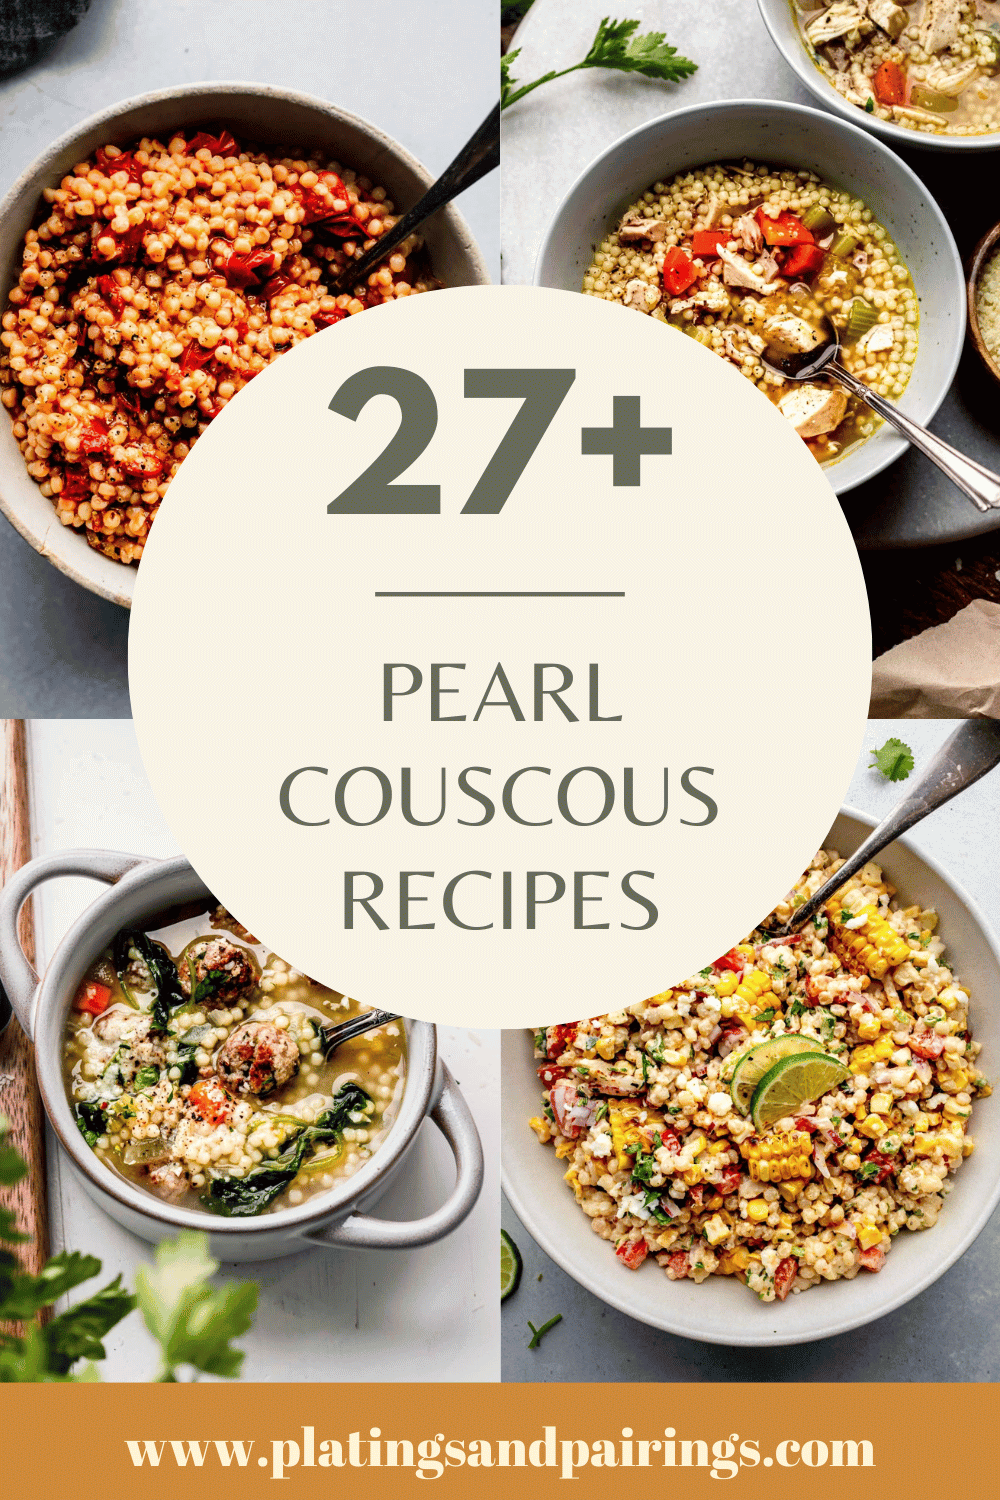 Collage of pearl couscous recipes with text overlay.